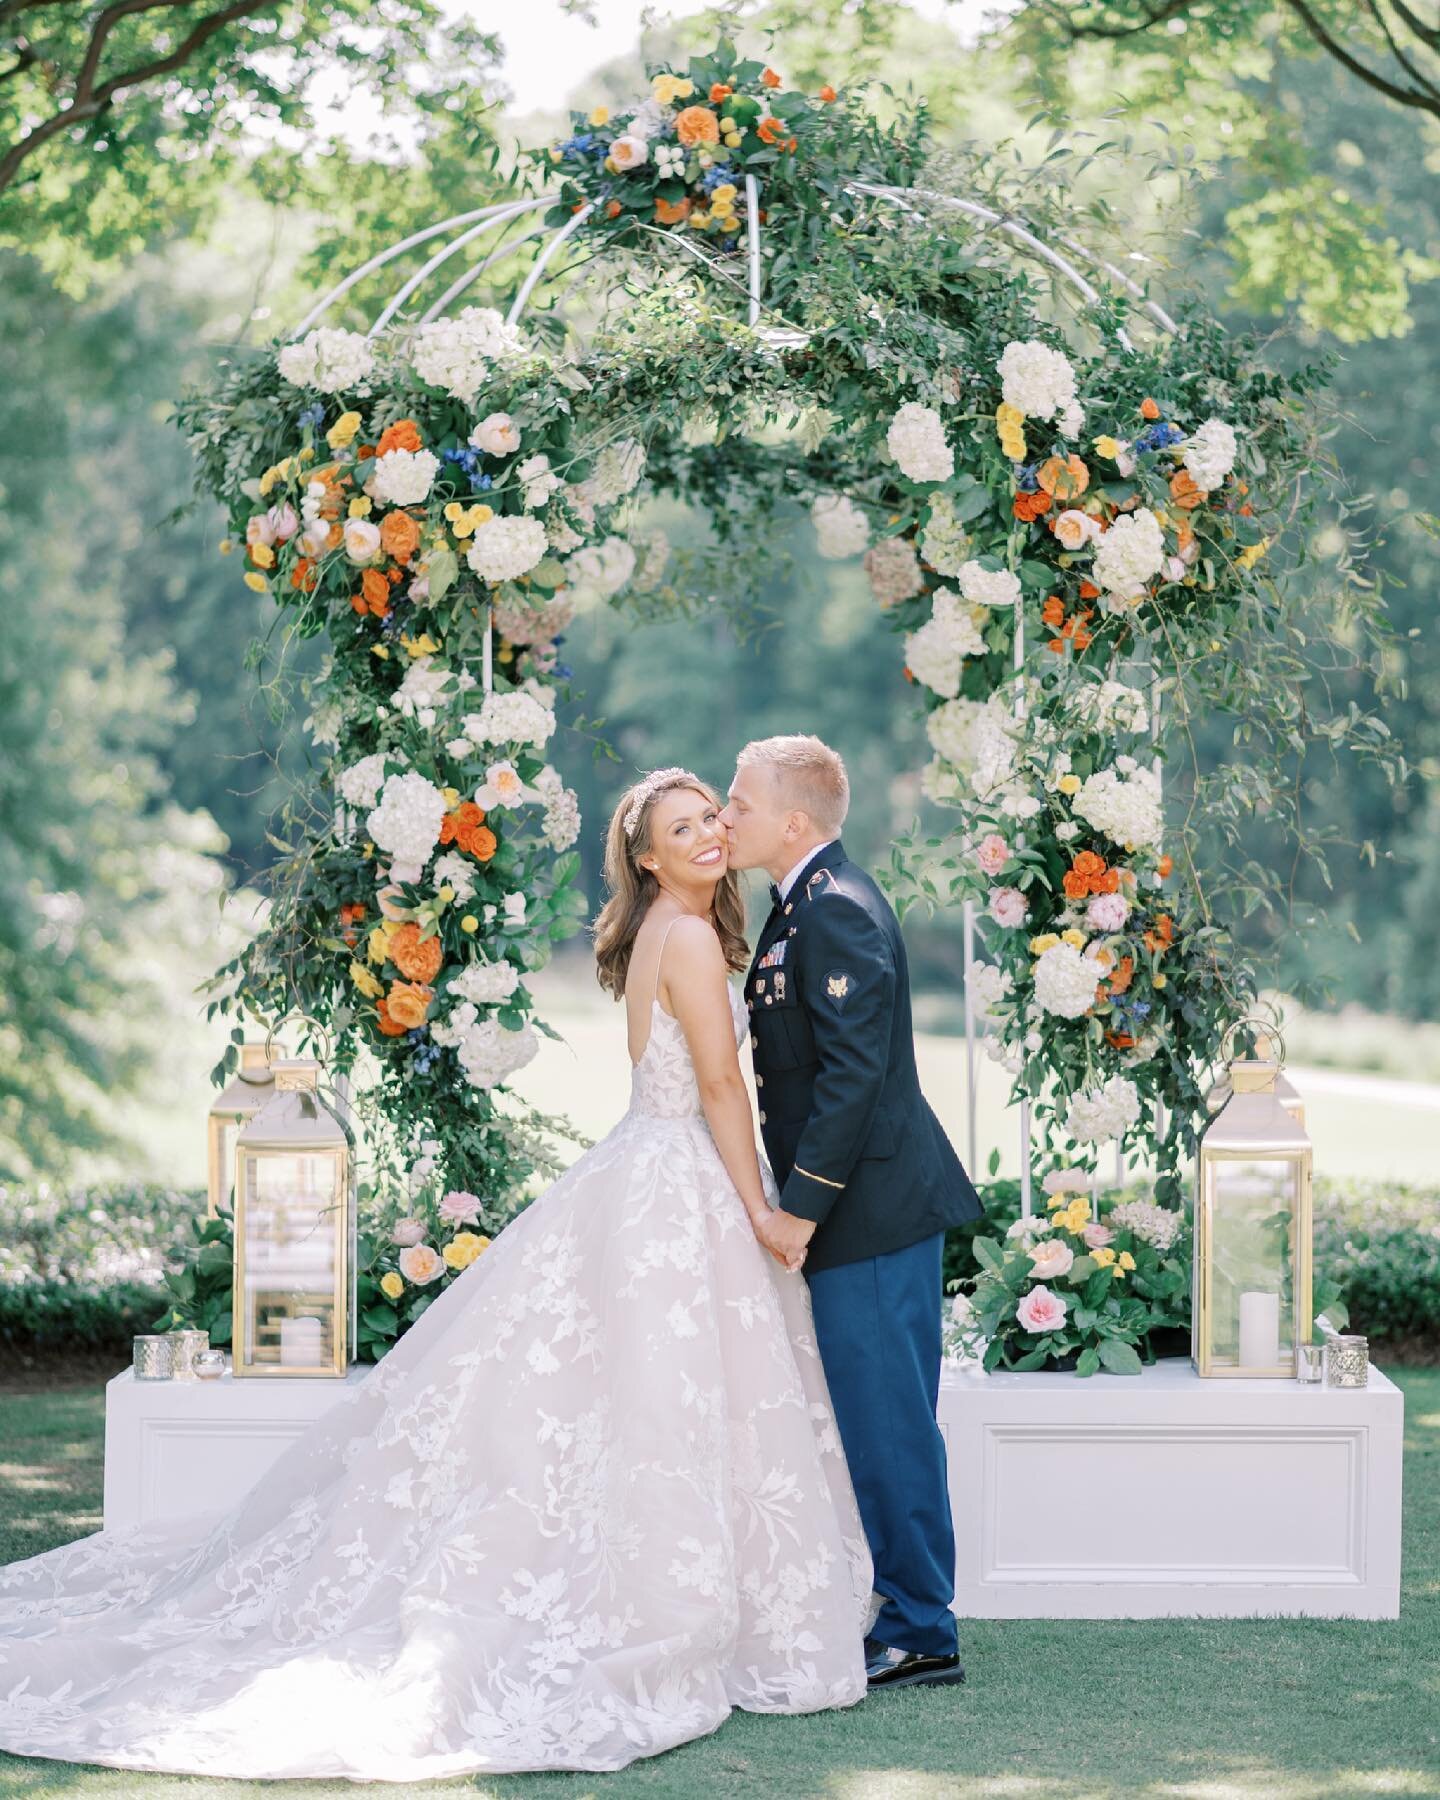 Magic  by beautiful couples and talented wedding vendors
.
Photography @haintbluecollective 
Planning @makeitperfectevents1
Venue and Catering @mooresmillclub
Farmhouse tables, string lights, chairs @preevents
China @teaandoldroses
Chandeliers: Bre